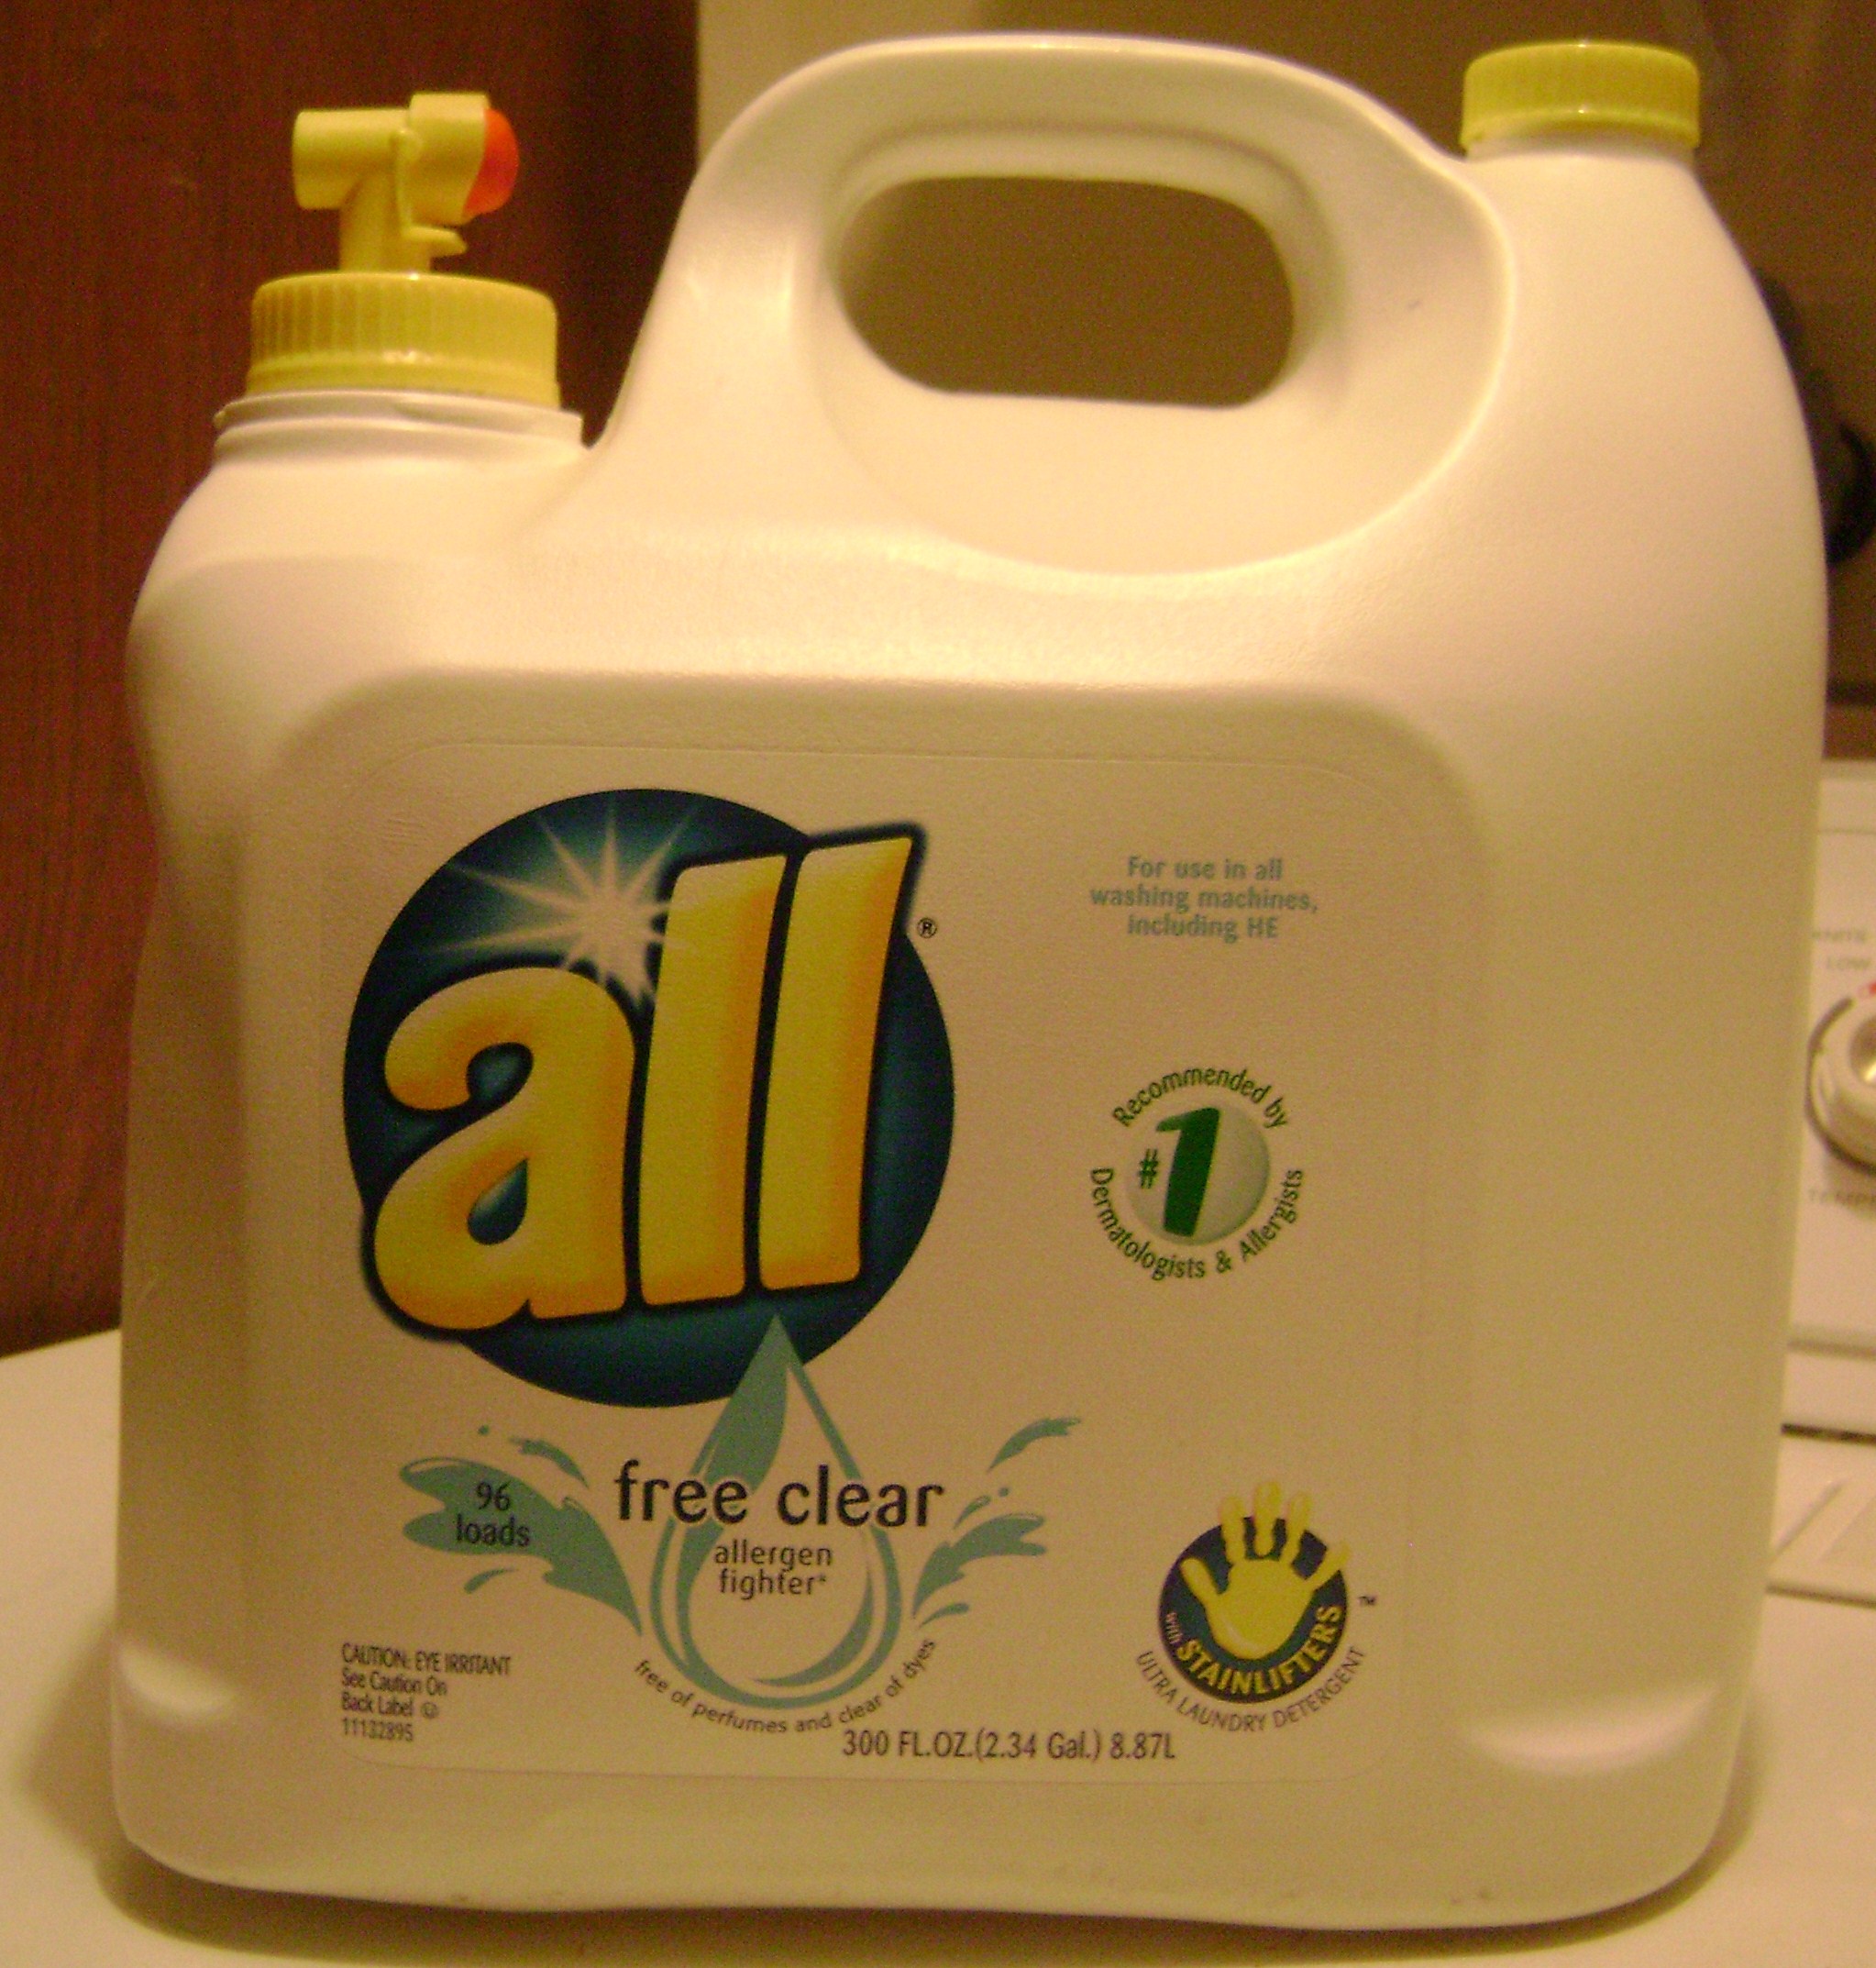 Use All Free & Clear in your hot water wash